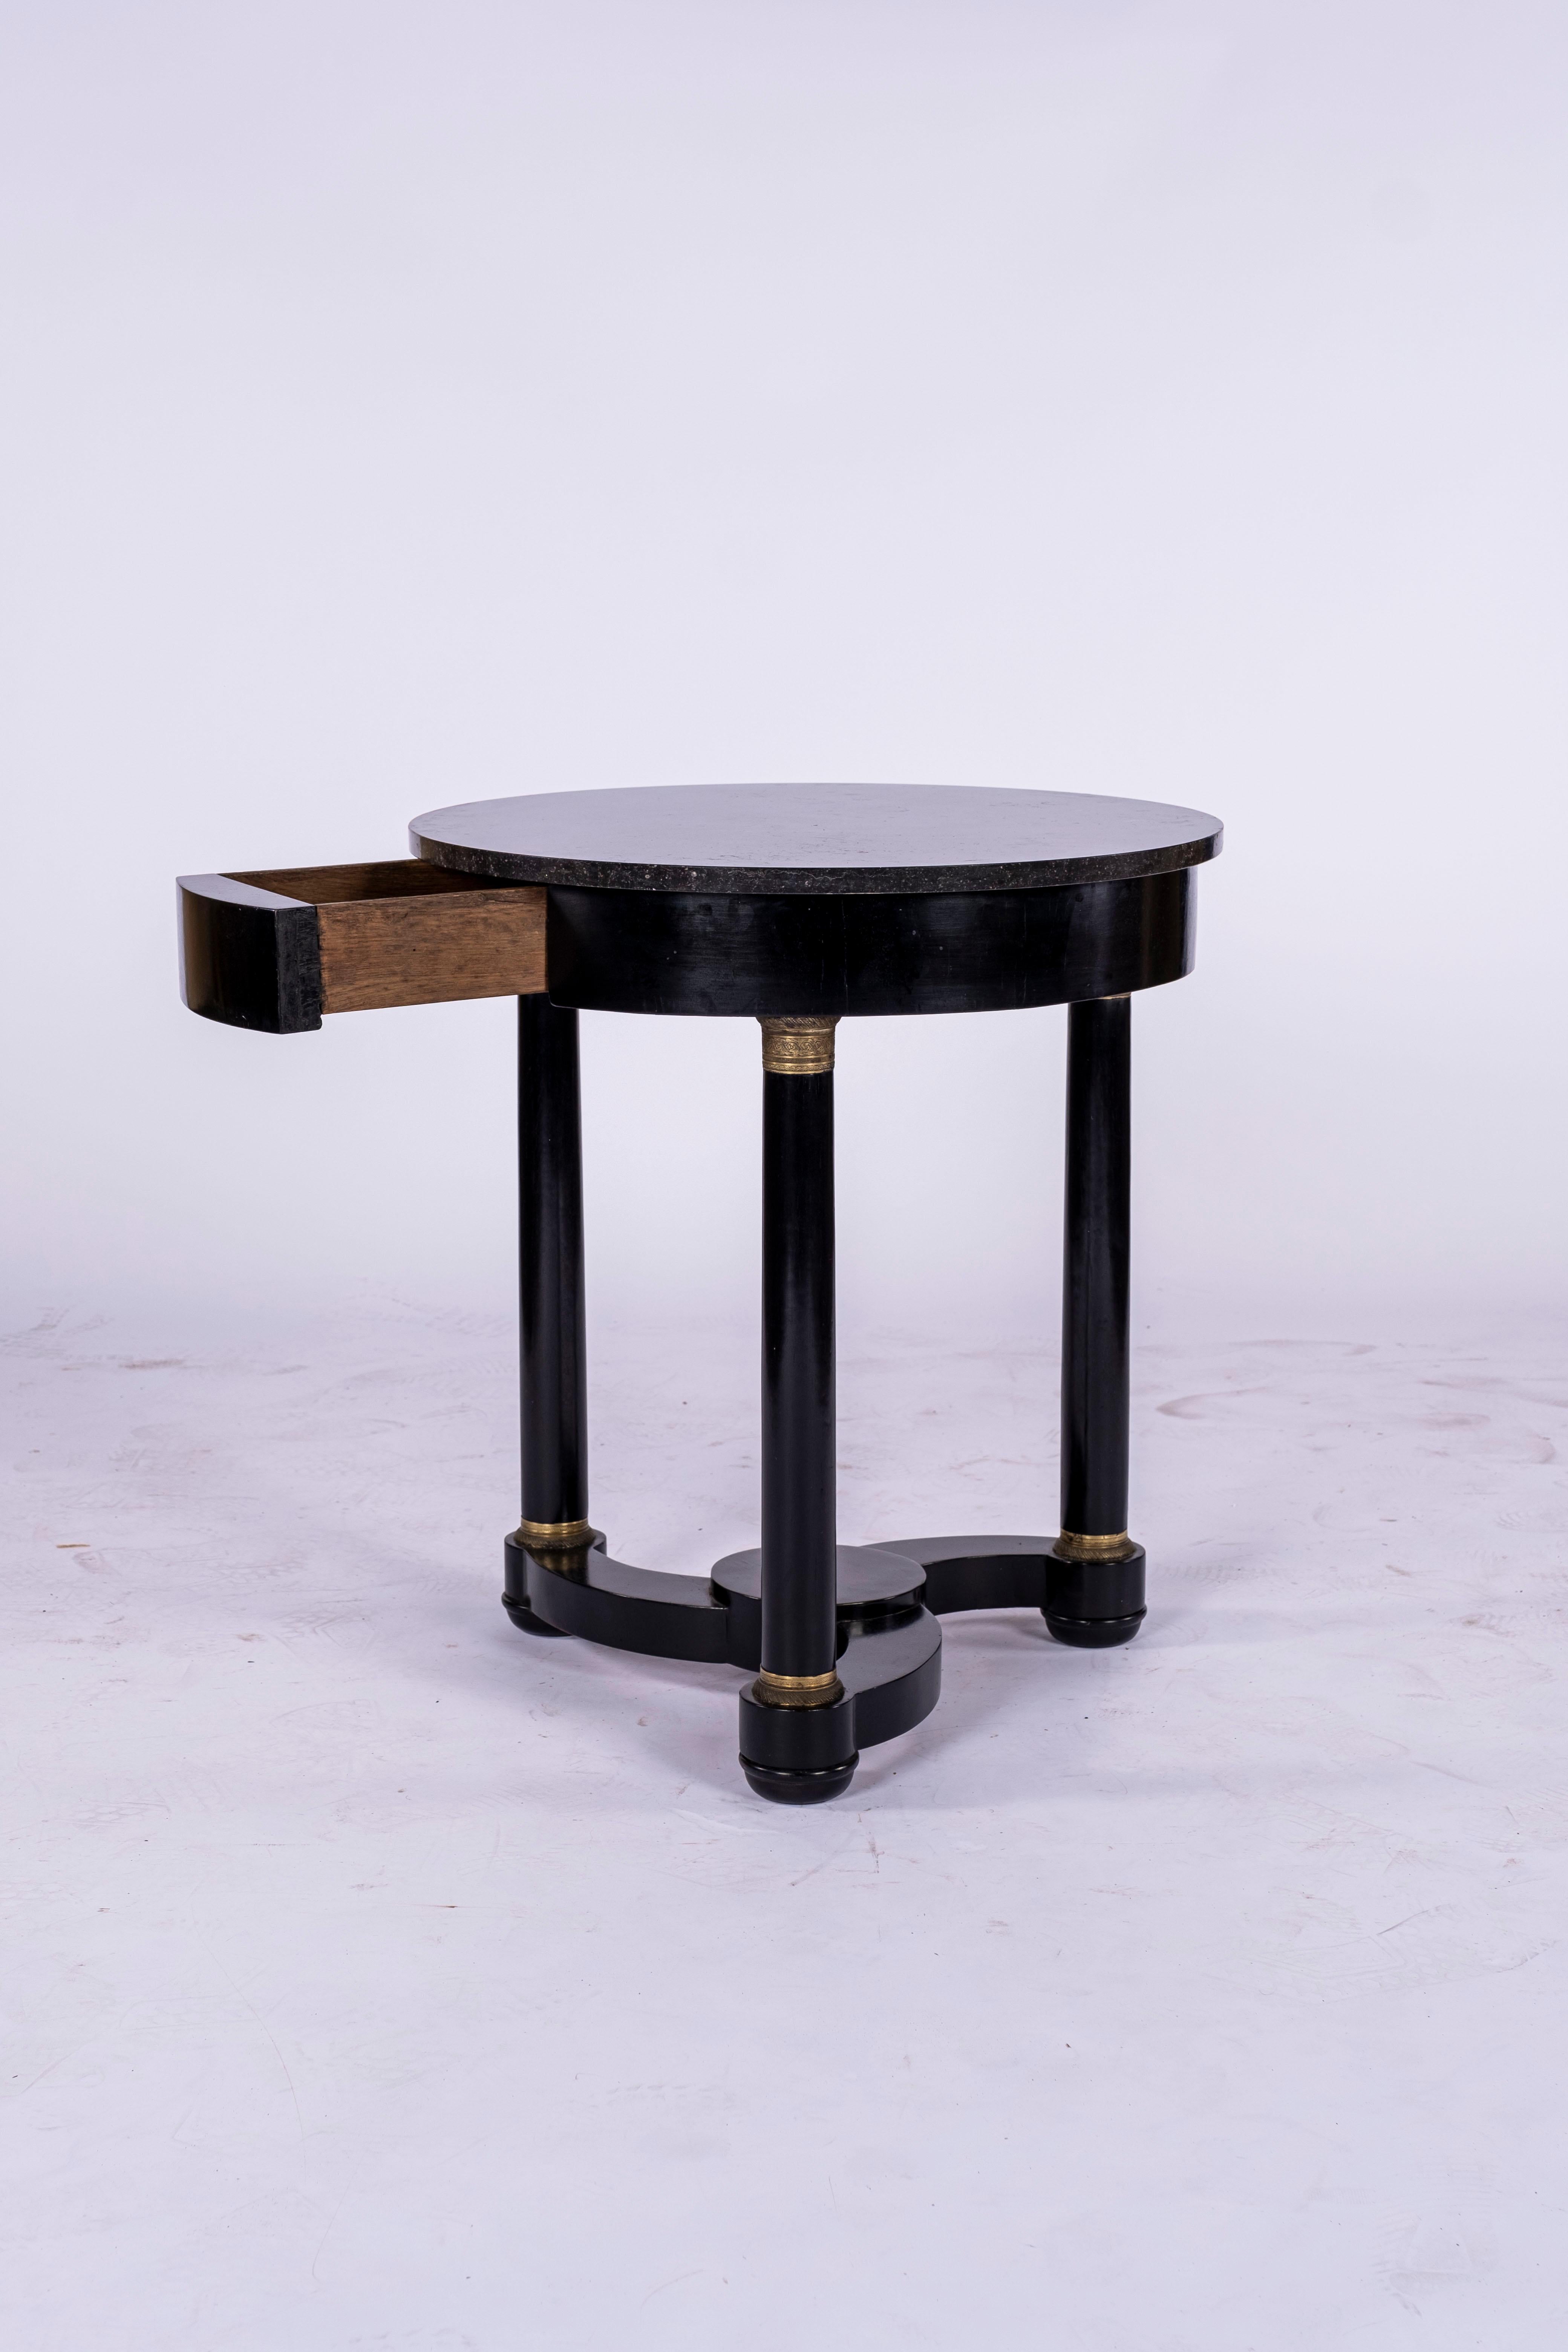 19th century ebonised Gueridon with a single drawer. Table has its original Belgian Black Marble Top and three cylindrical legs linked together by a propeller base. Decorative gilt bronze detail at the top and bottom of each leg. Found in France.